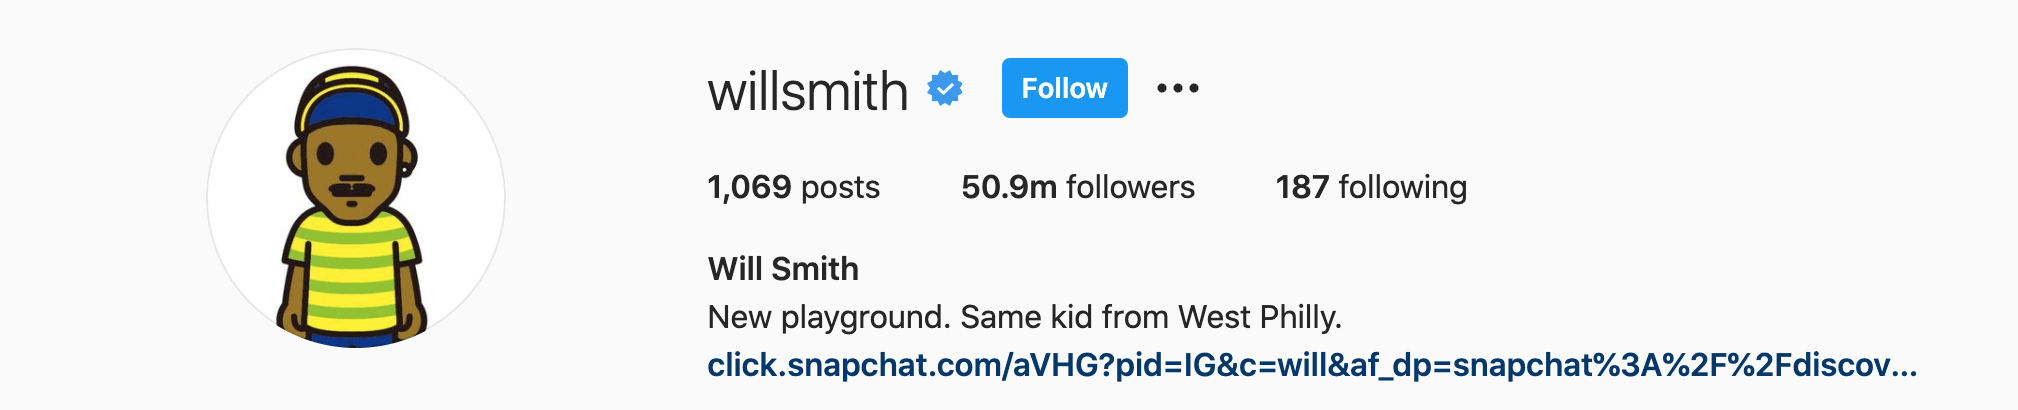 Top Instagram Influencers - WILL SMITH